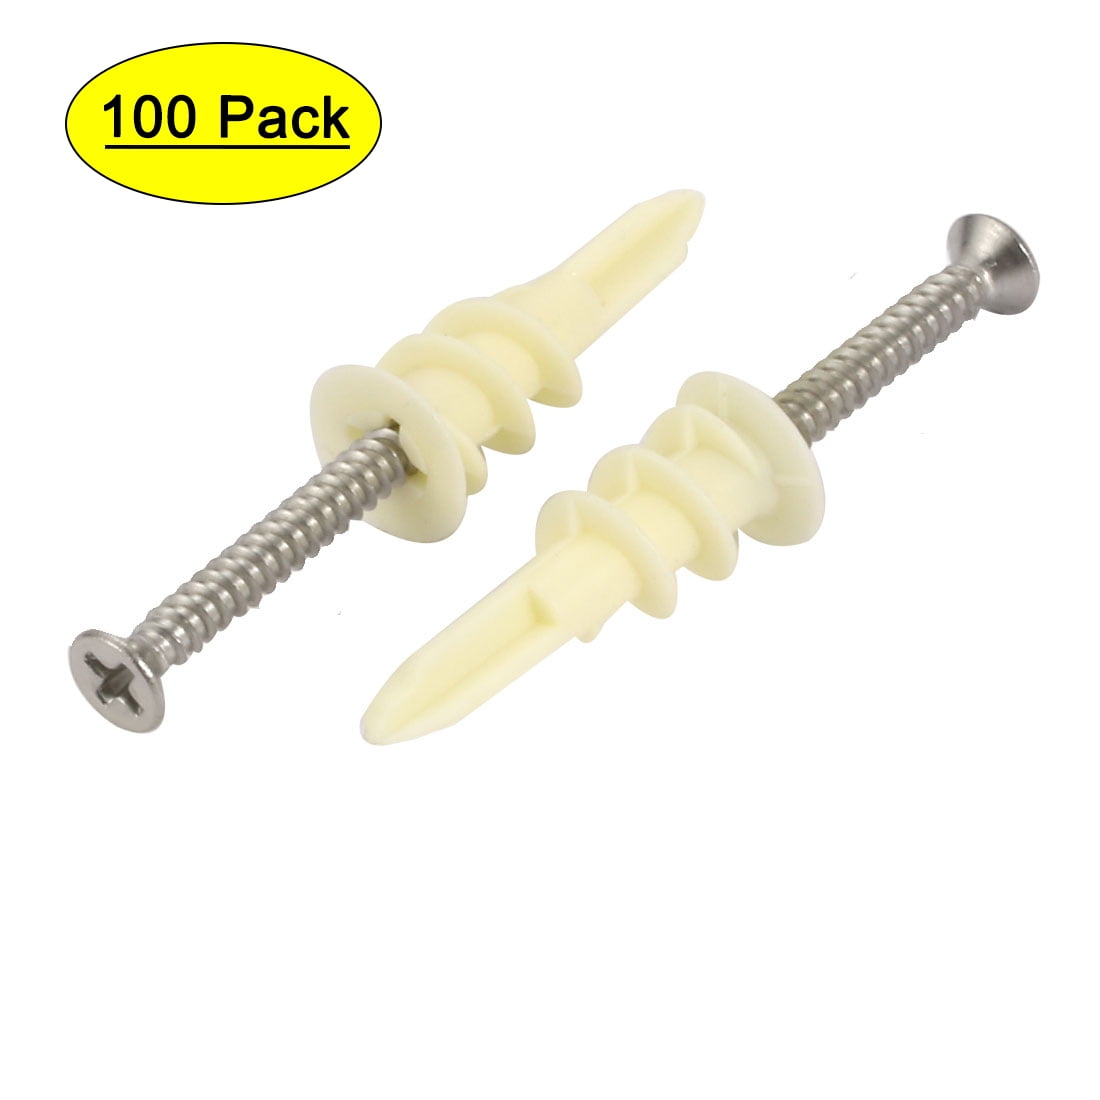 100pc Metal Drywall Anchors Assortment Self Drilling Anchors with Screw Kit 